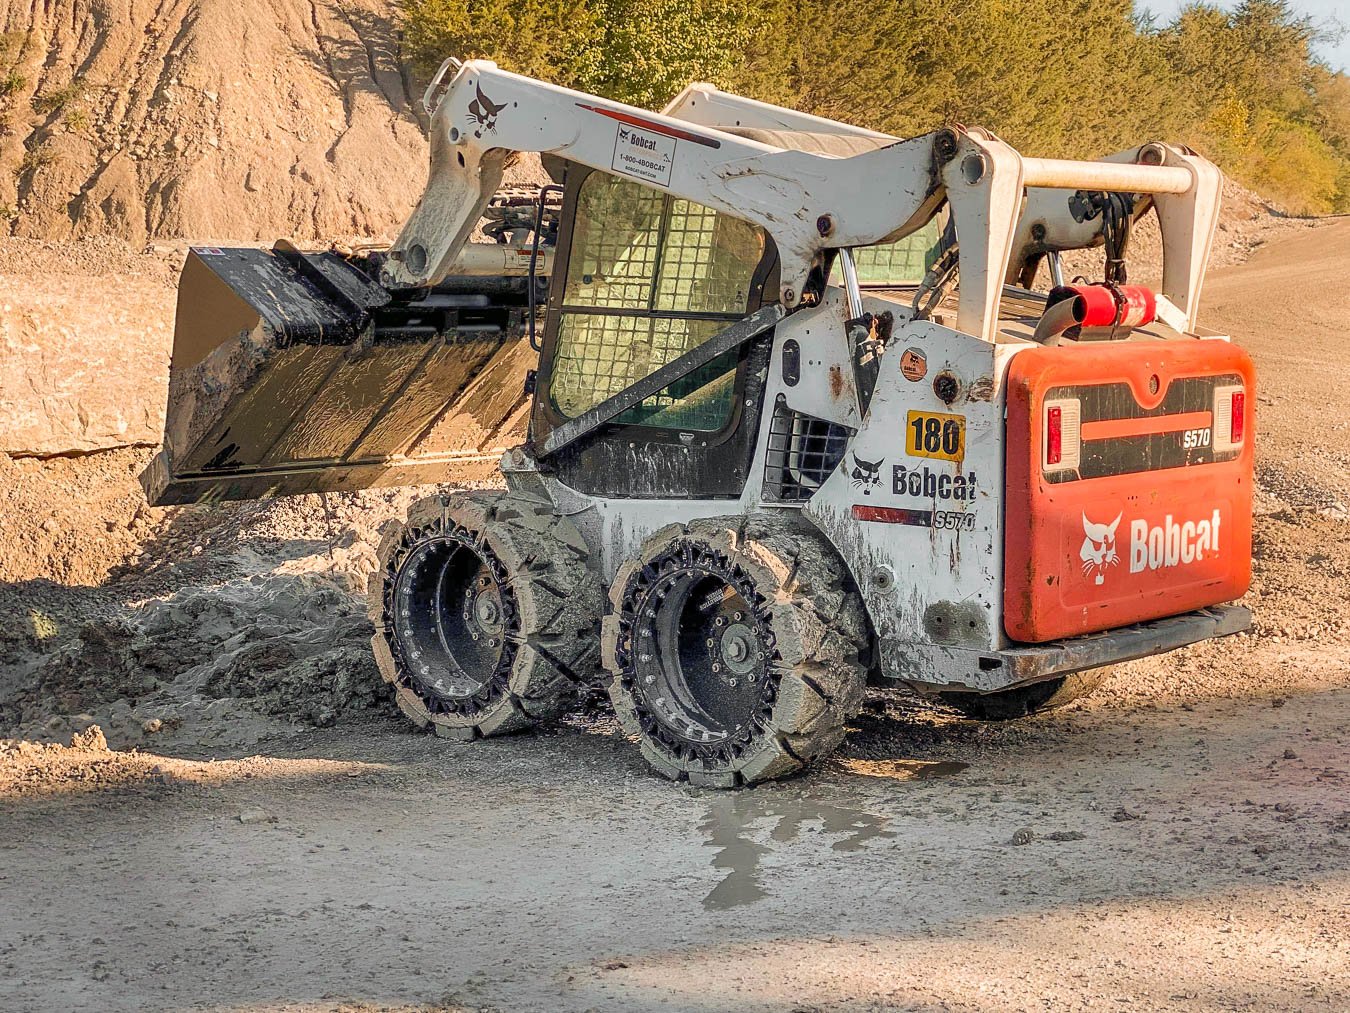 In this image, a Bobcat S570 is fitted with our Bobcat tires